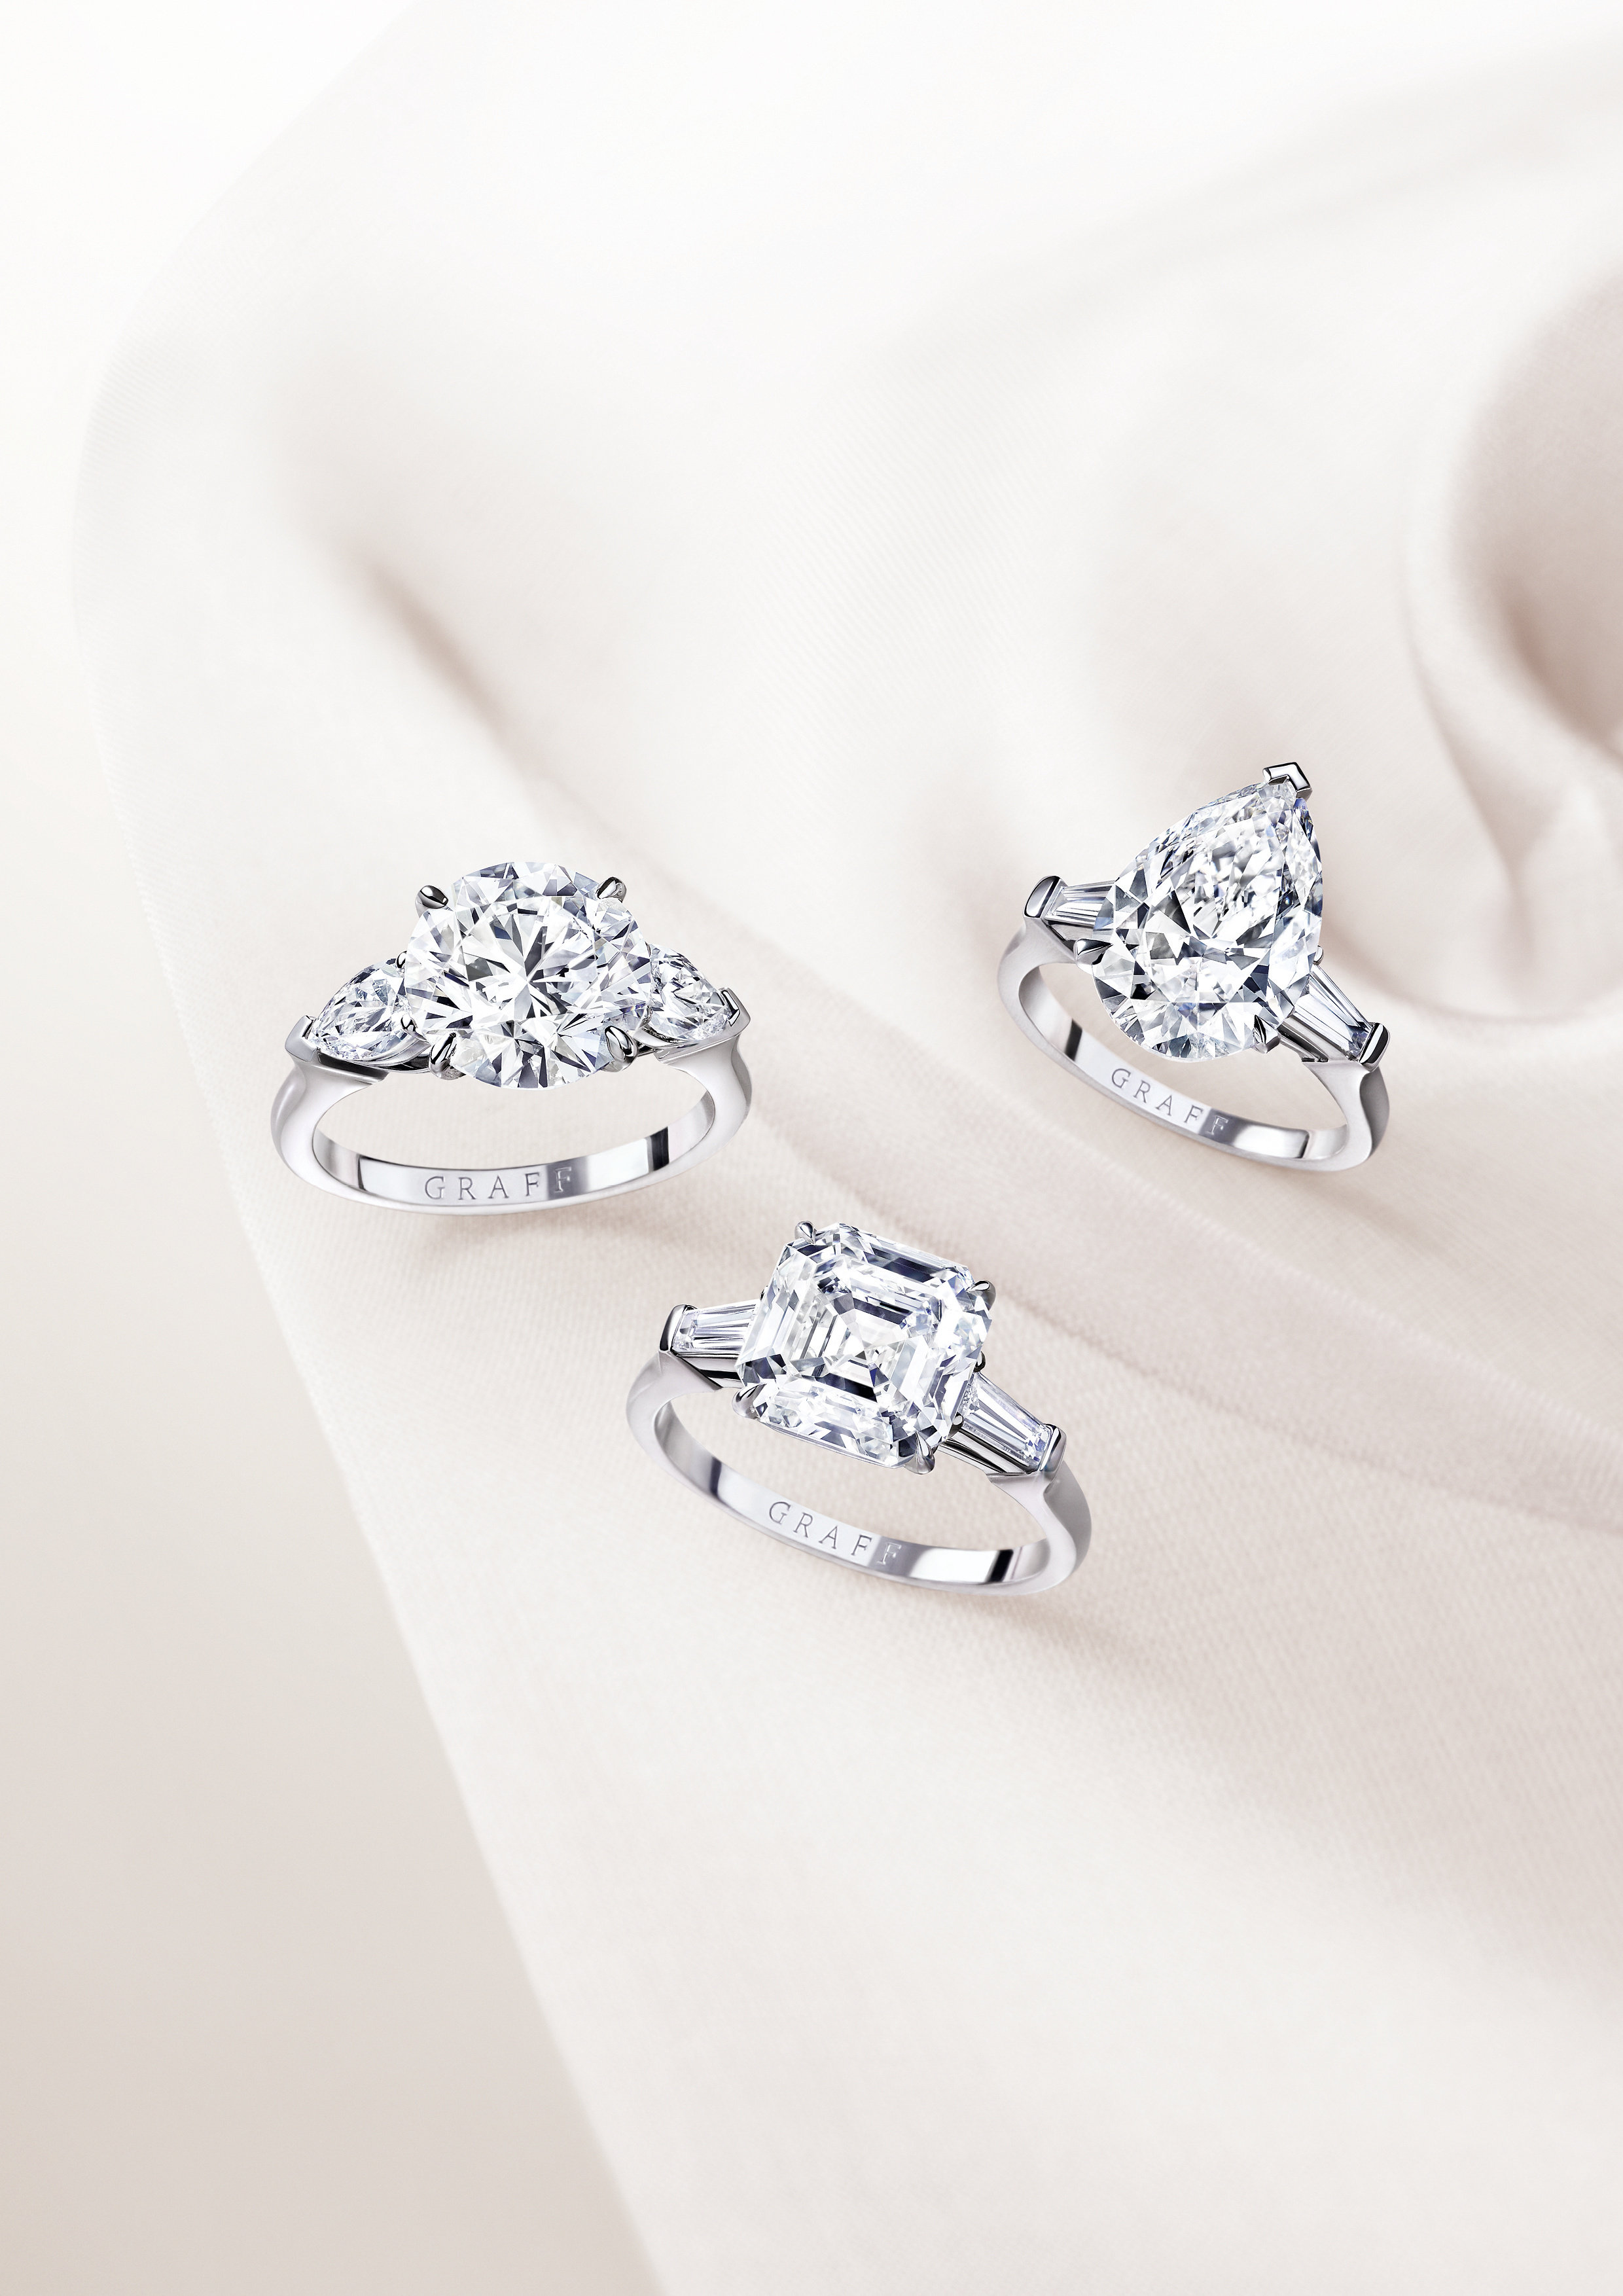 Engagement rings from the Graff jewellery collection. Photo: Graff